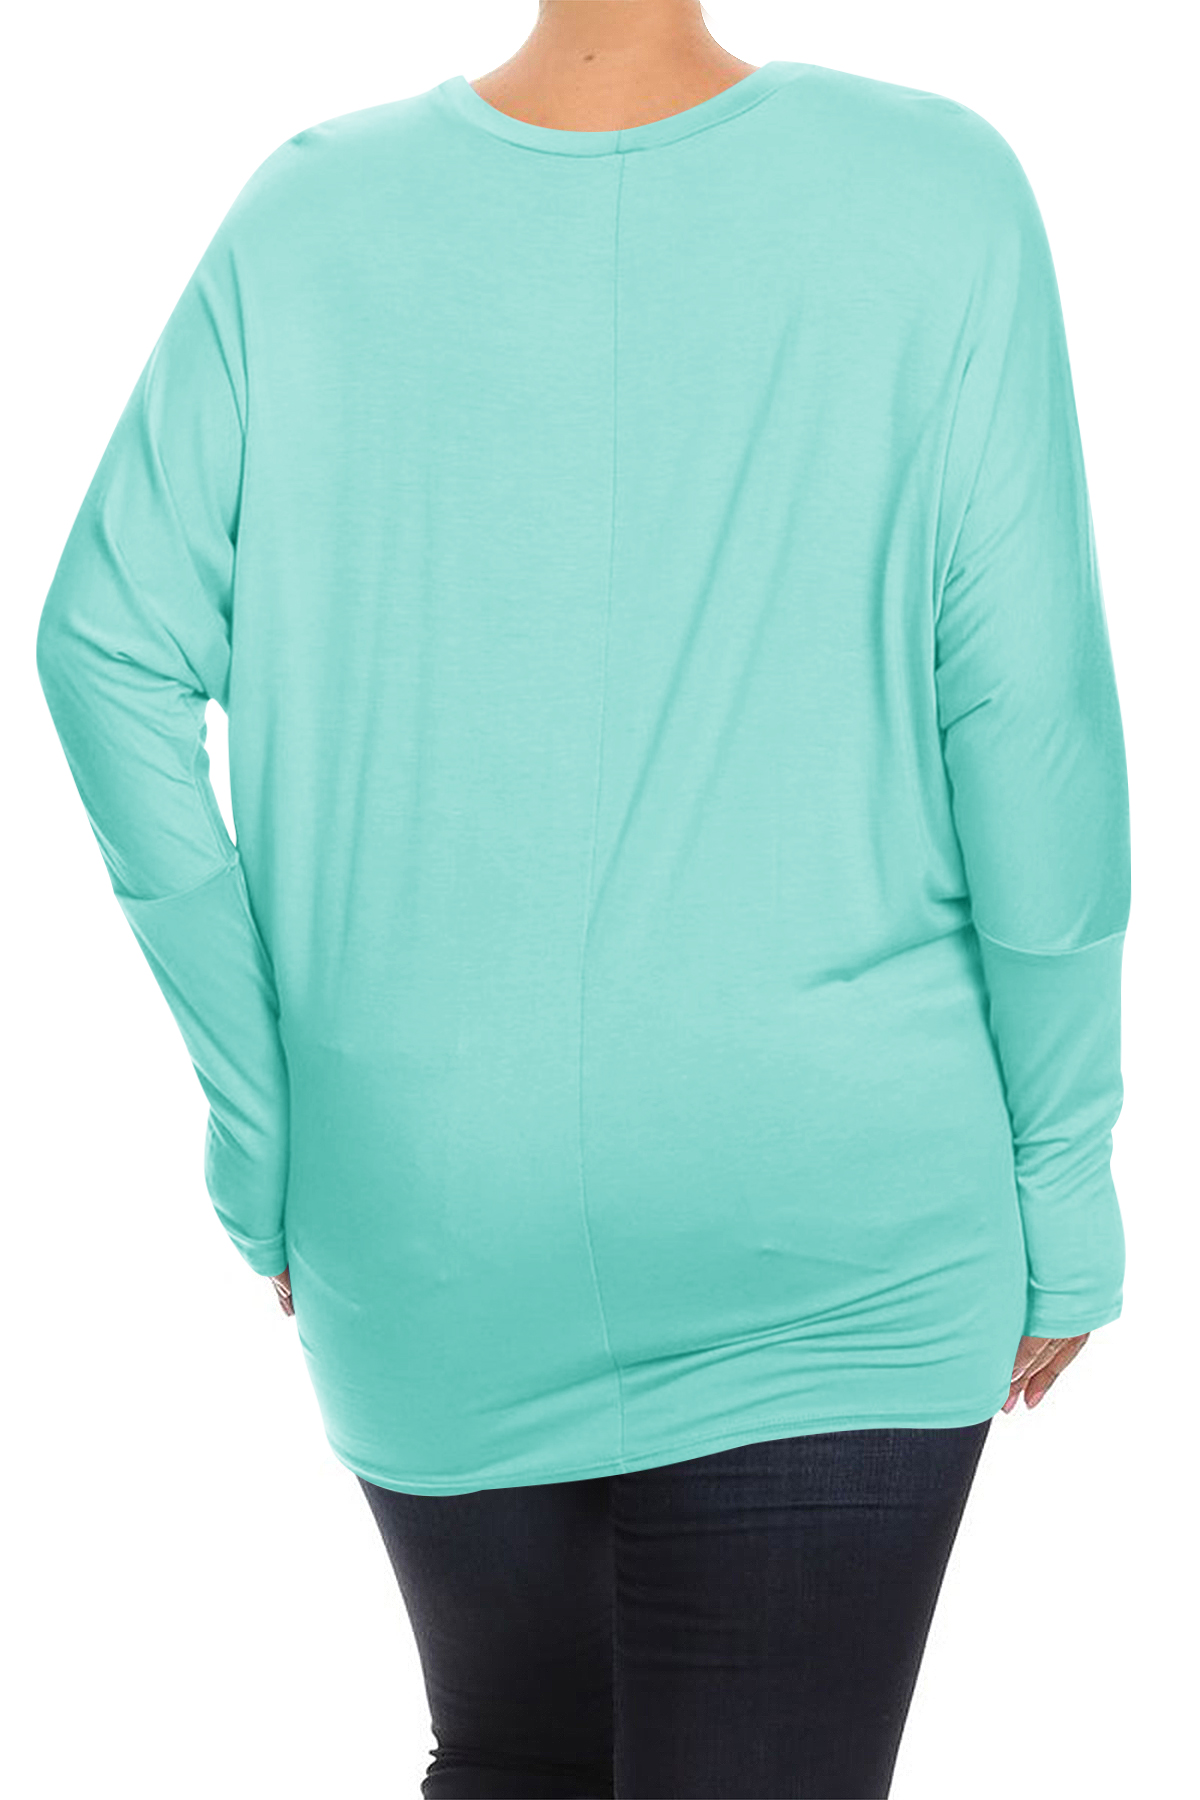 Moa Collection Women's Plus Size Dolman Long Sleeve Solid Loose Fit Tunic Top